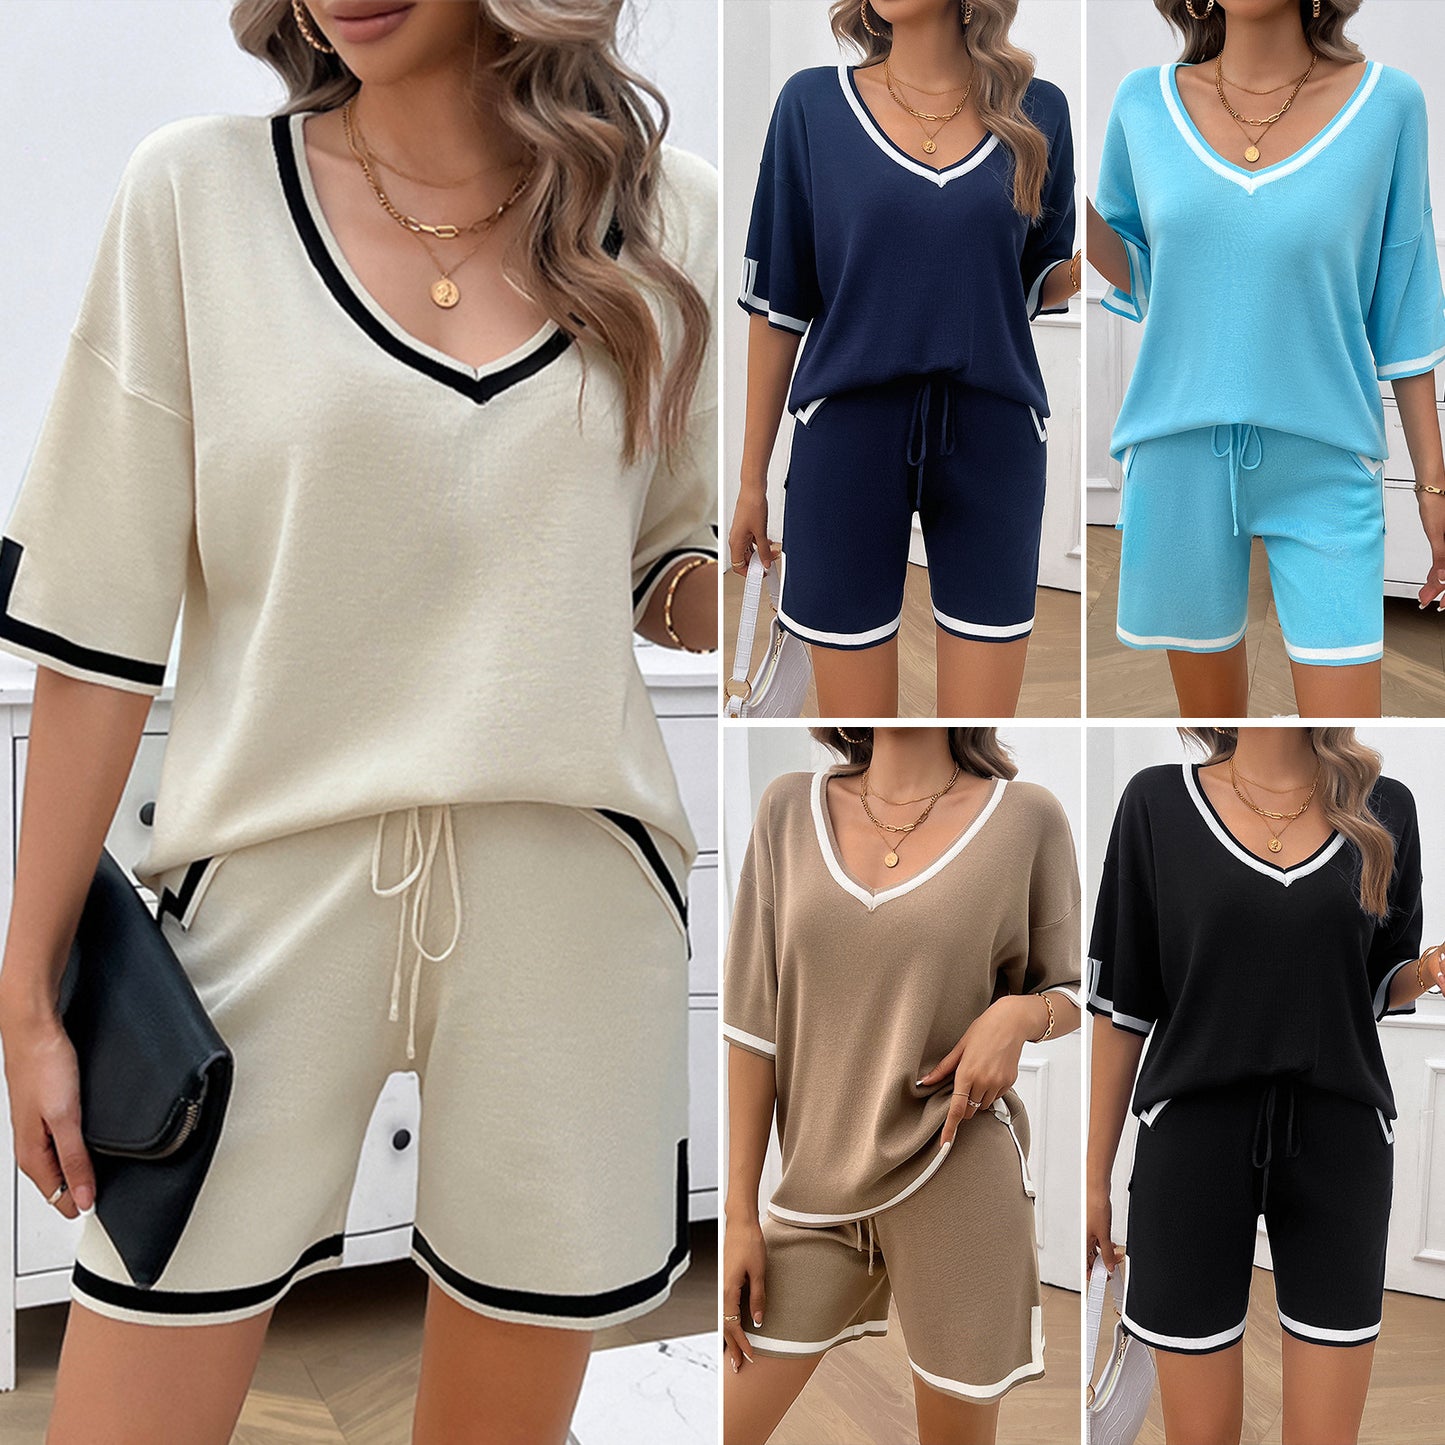 Women's Casual Loose V-neck Sweater Suit